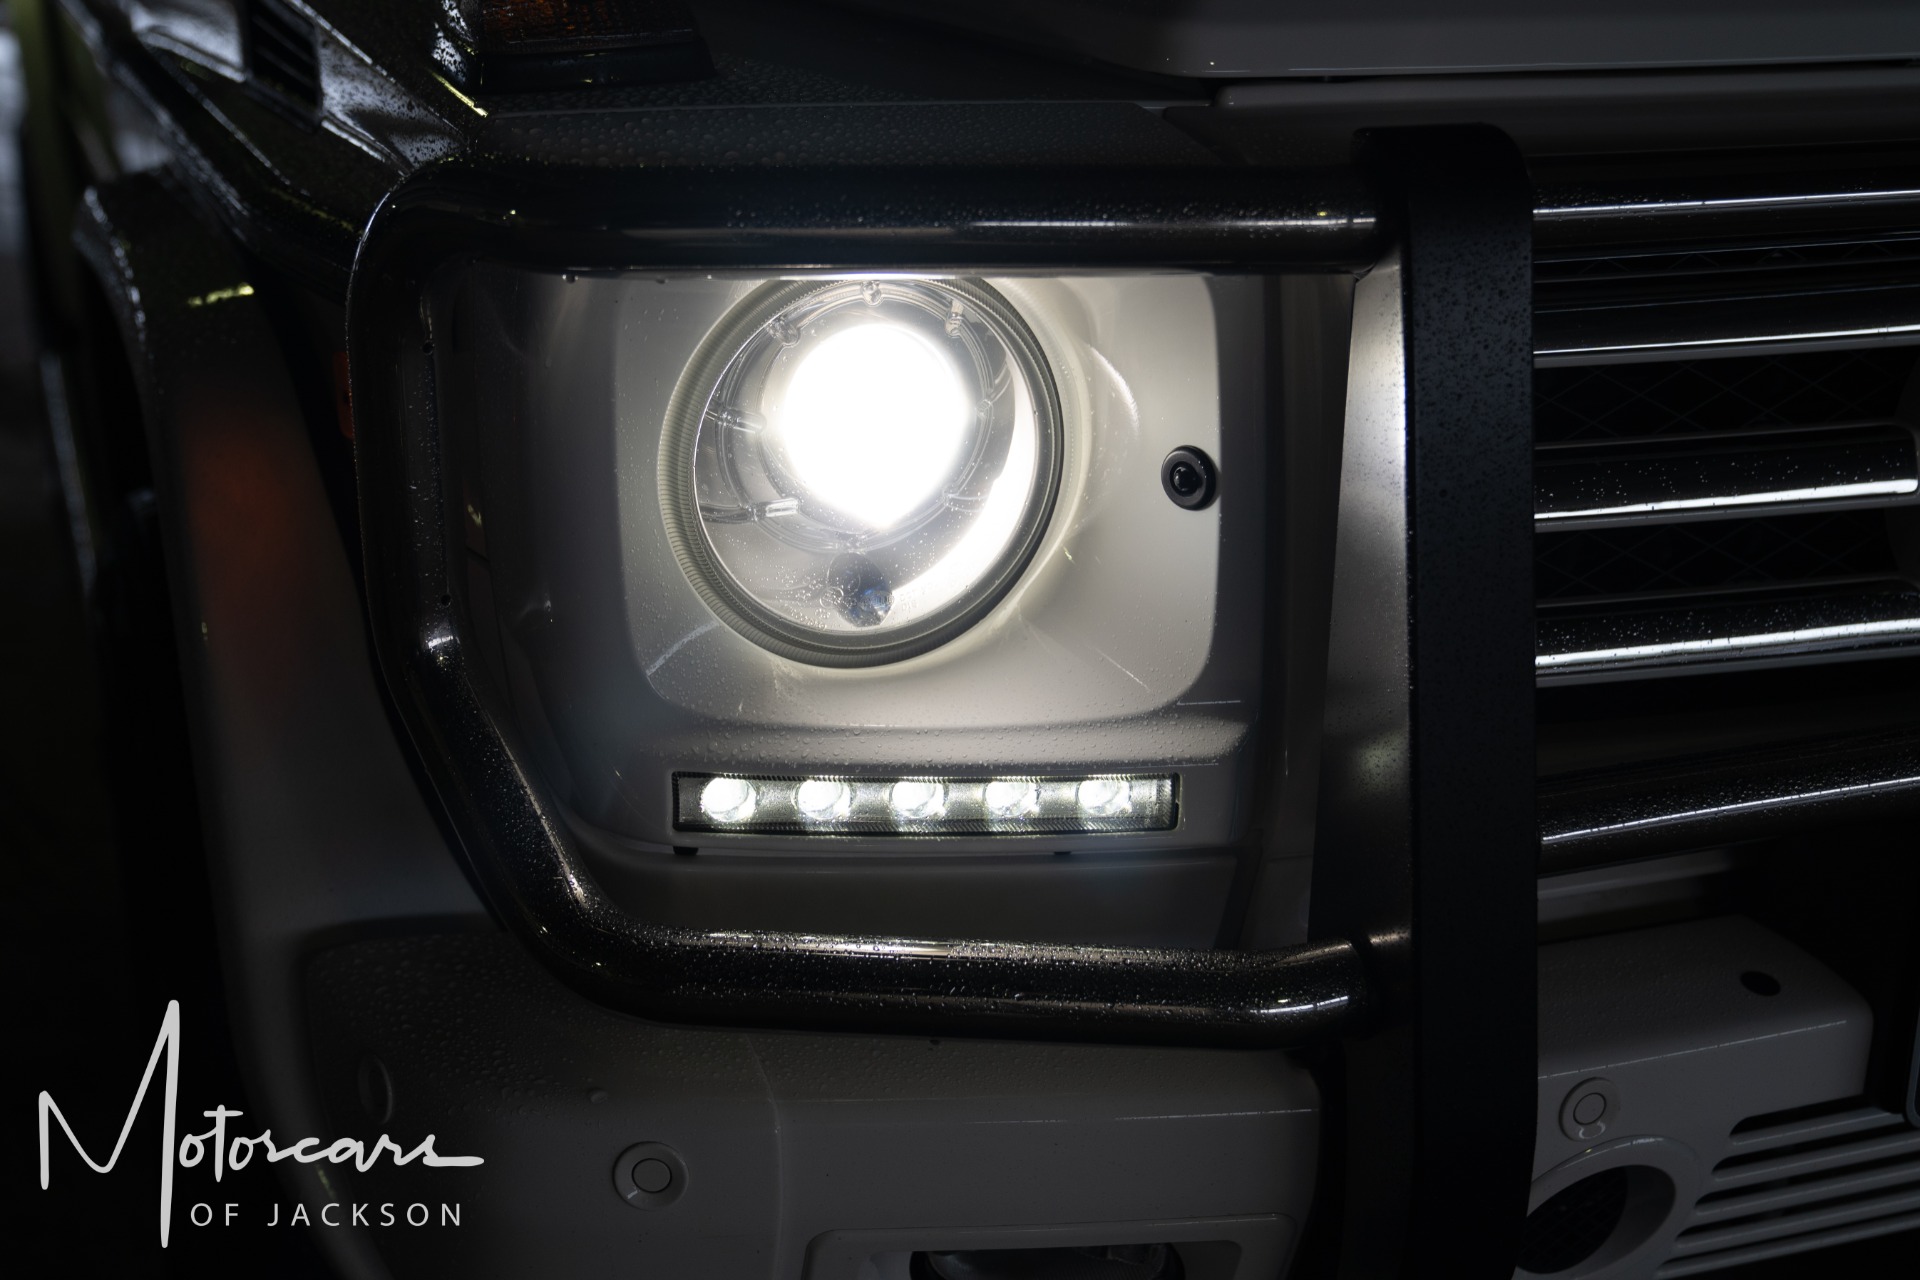 Used-2015-Mercedes-Benz-G-Class-G-550-for-sale-Jackson-MS